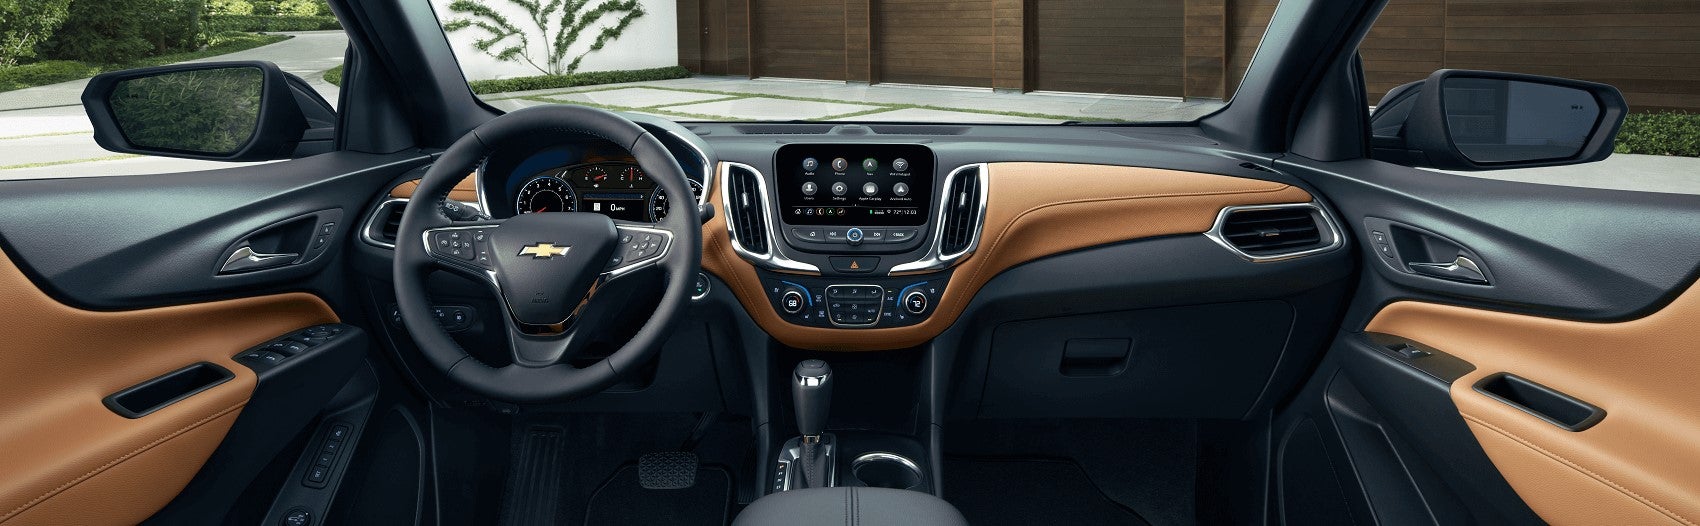 Chevy Equinox black and brown leather interior with dashboard technology